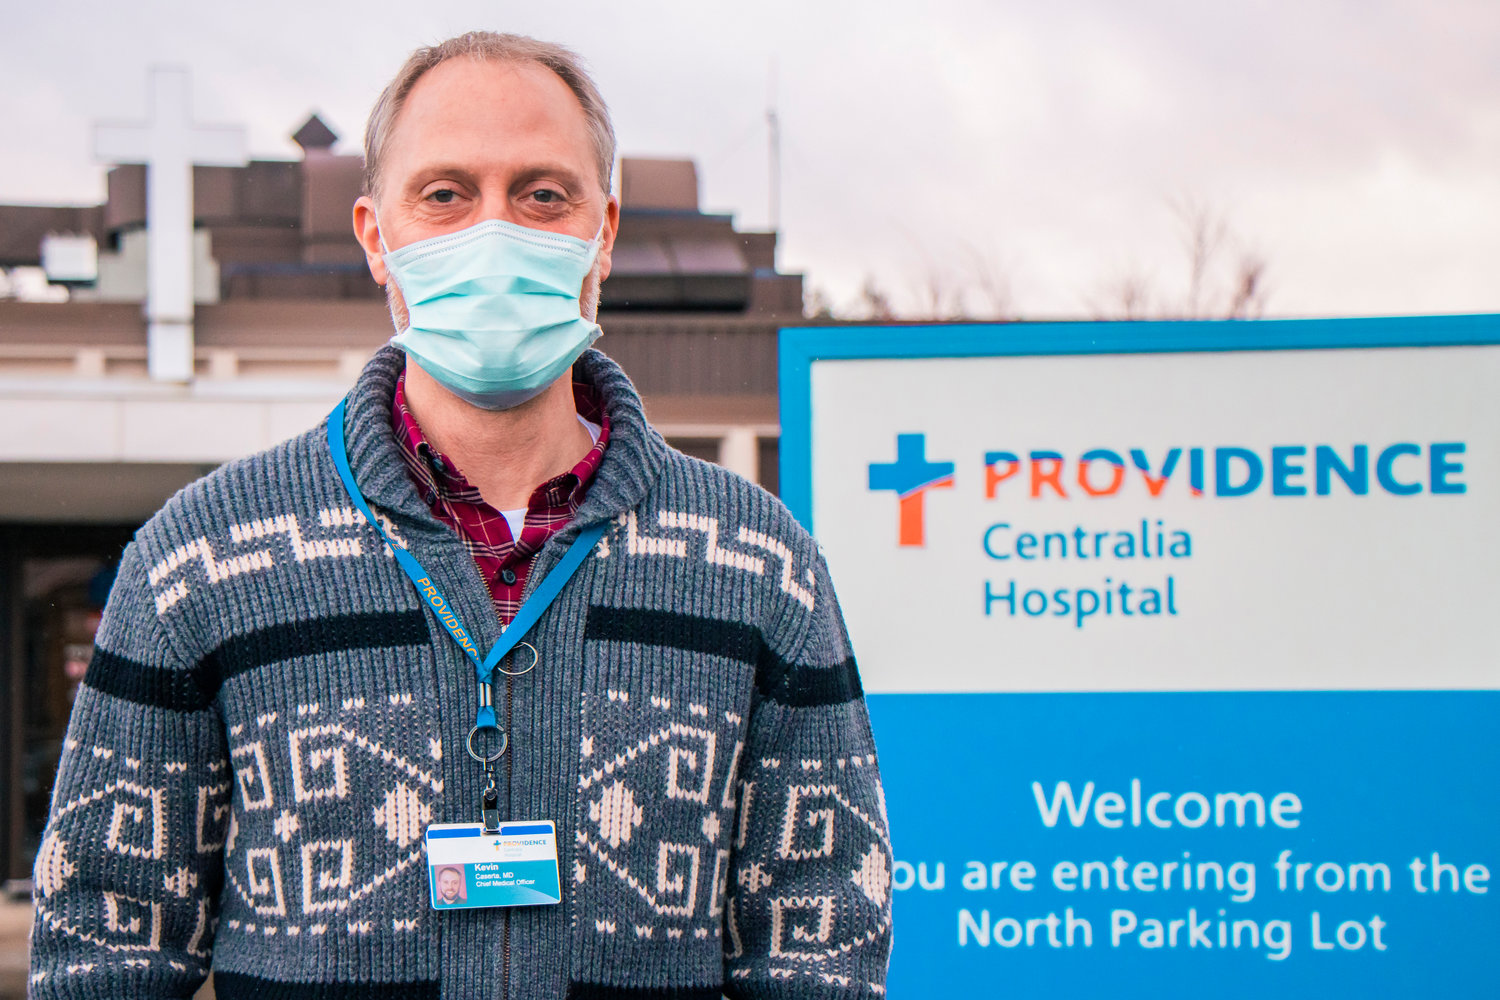 Dr. Kevin Caserta poses for a photo in front of Providence Centralia Hospital on Tuesday in Centralia.